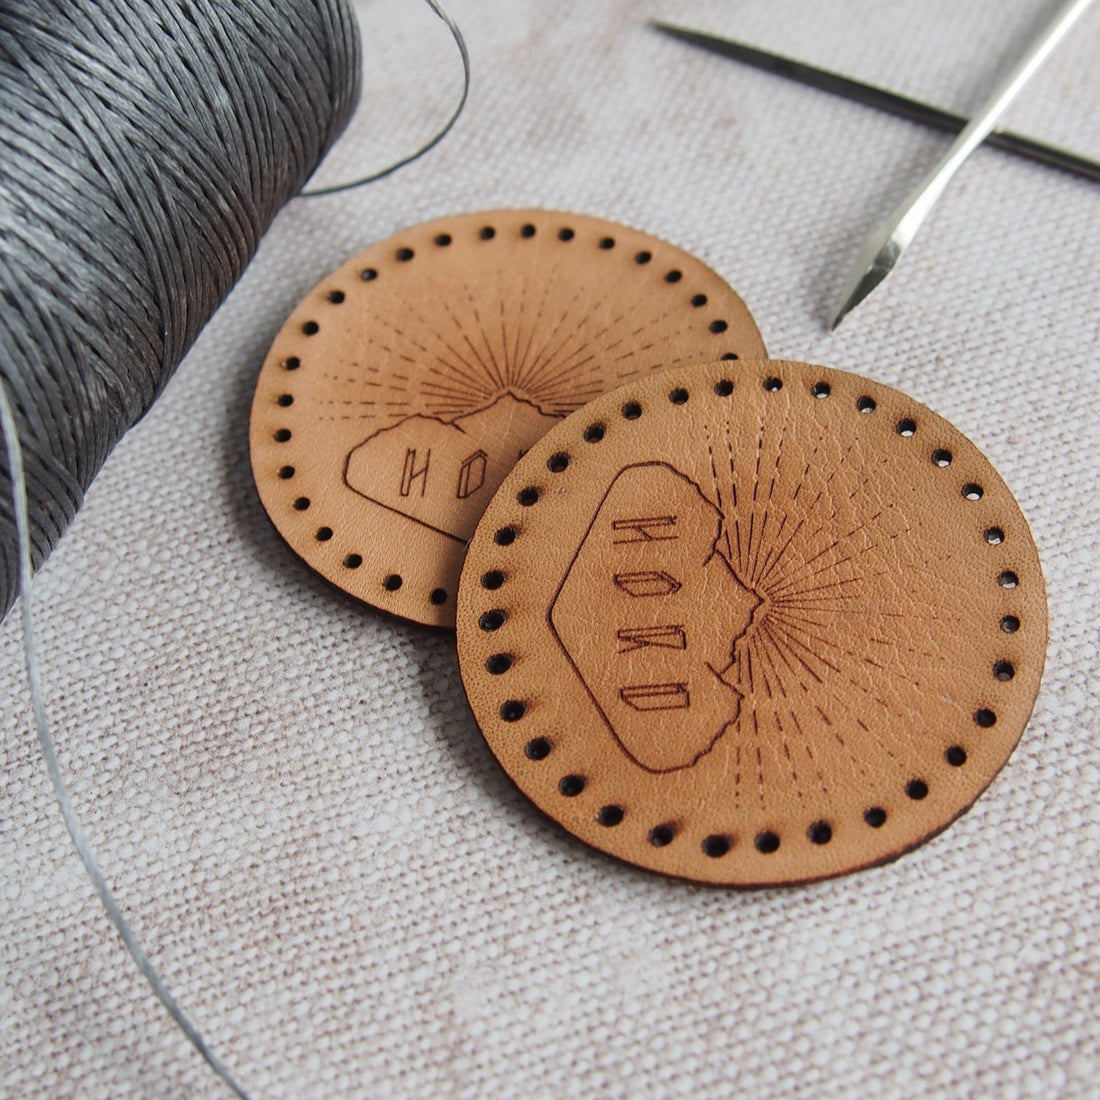  Leather patches with pre-cut holes engraved with the hord logo.